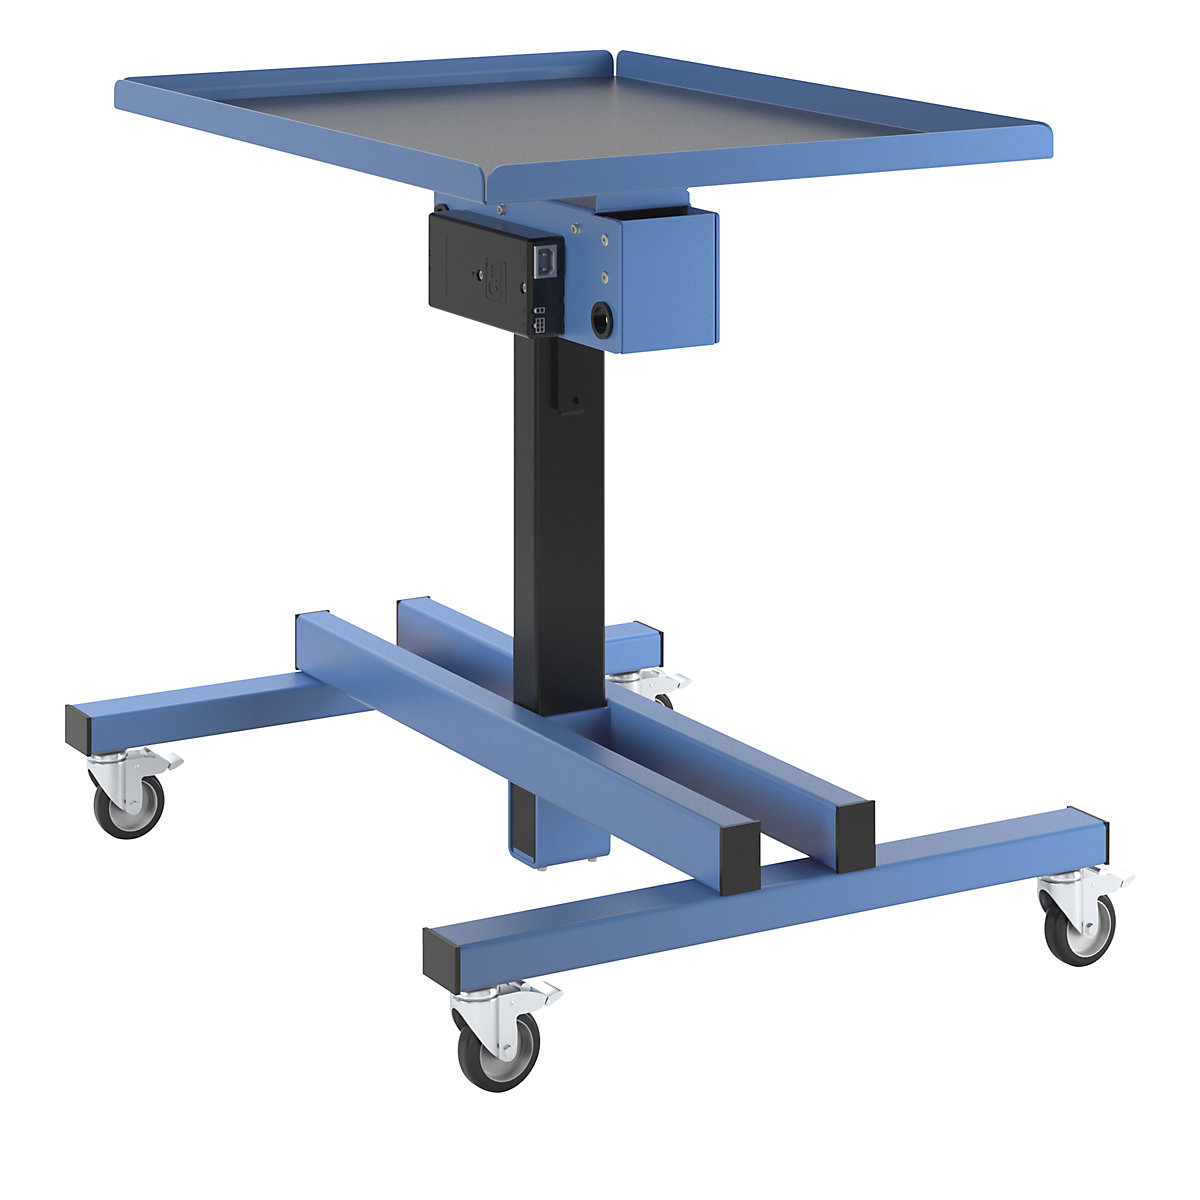 Electric material stand – eurokraft pro, platform LxW 800 x 600 mm, with tray-23